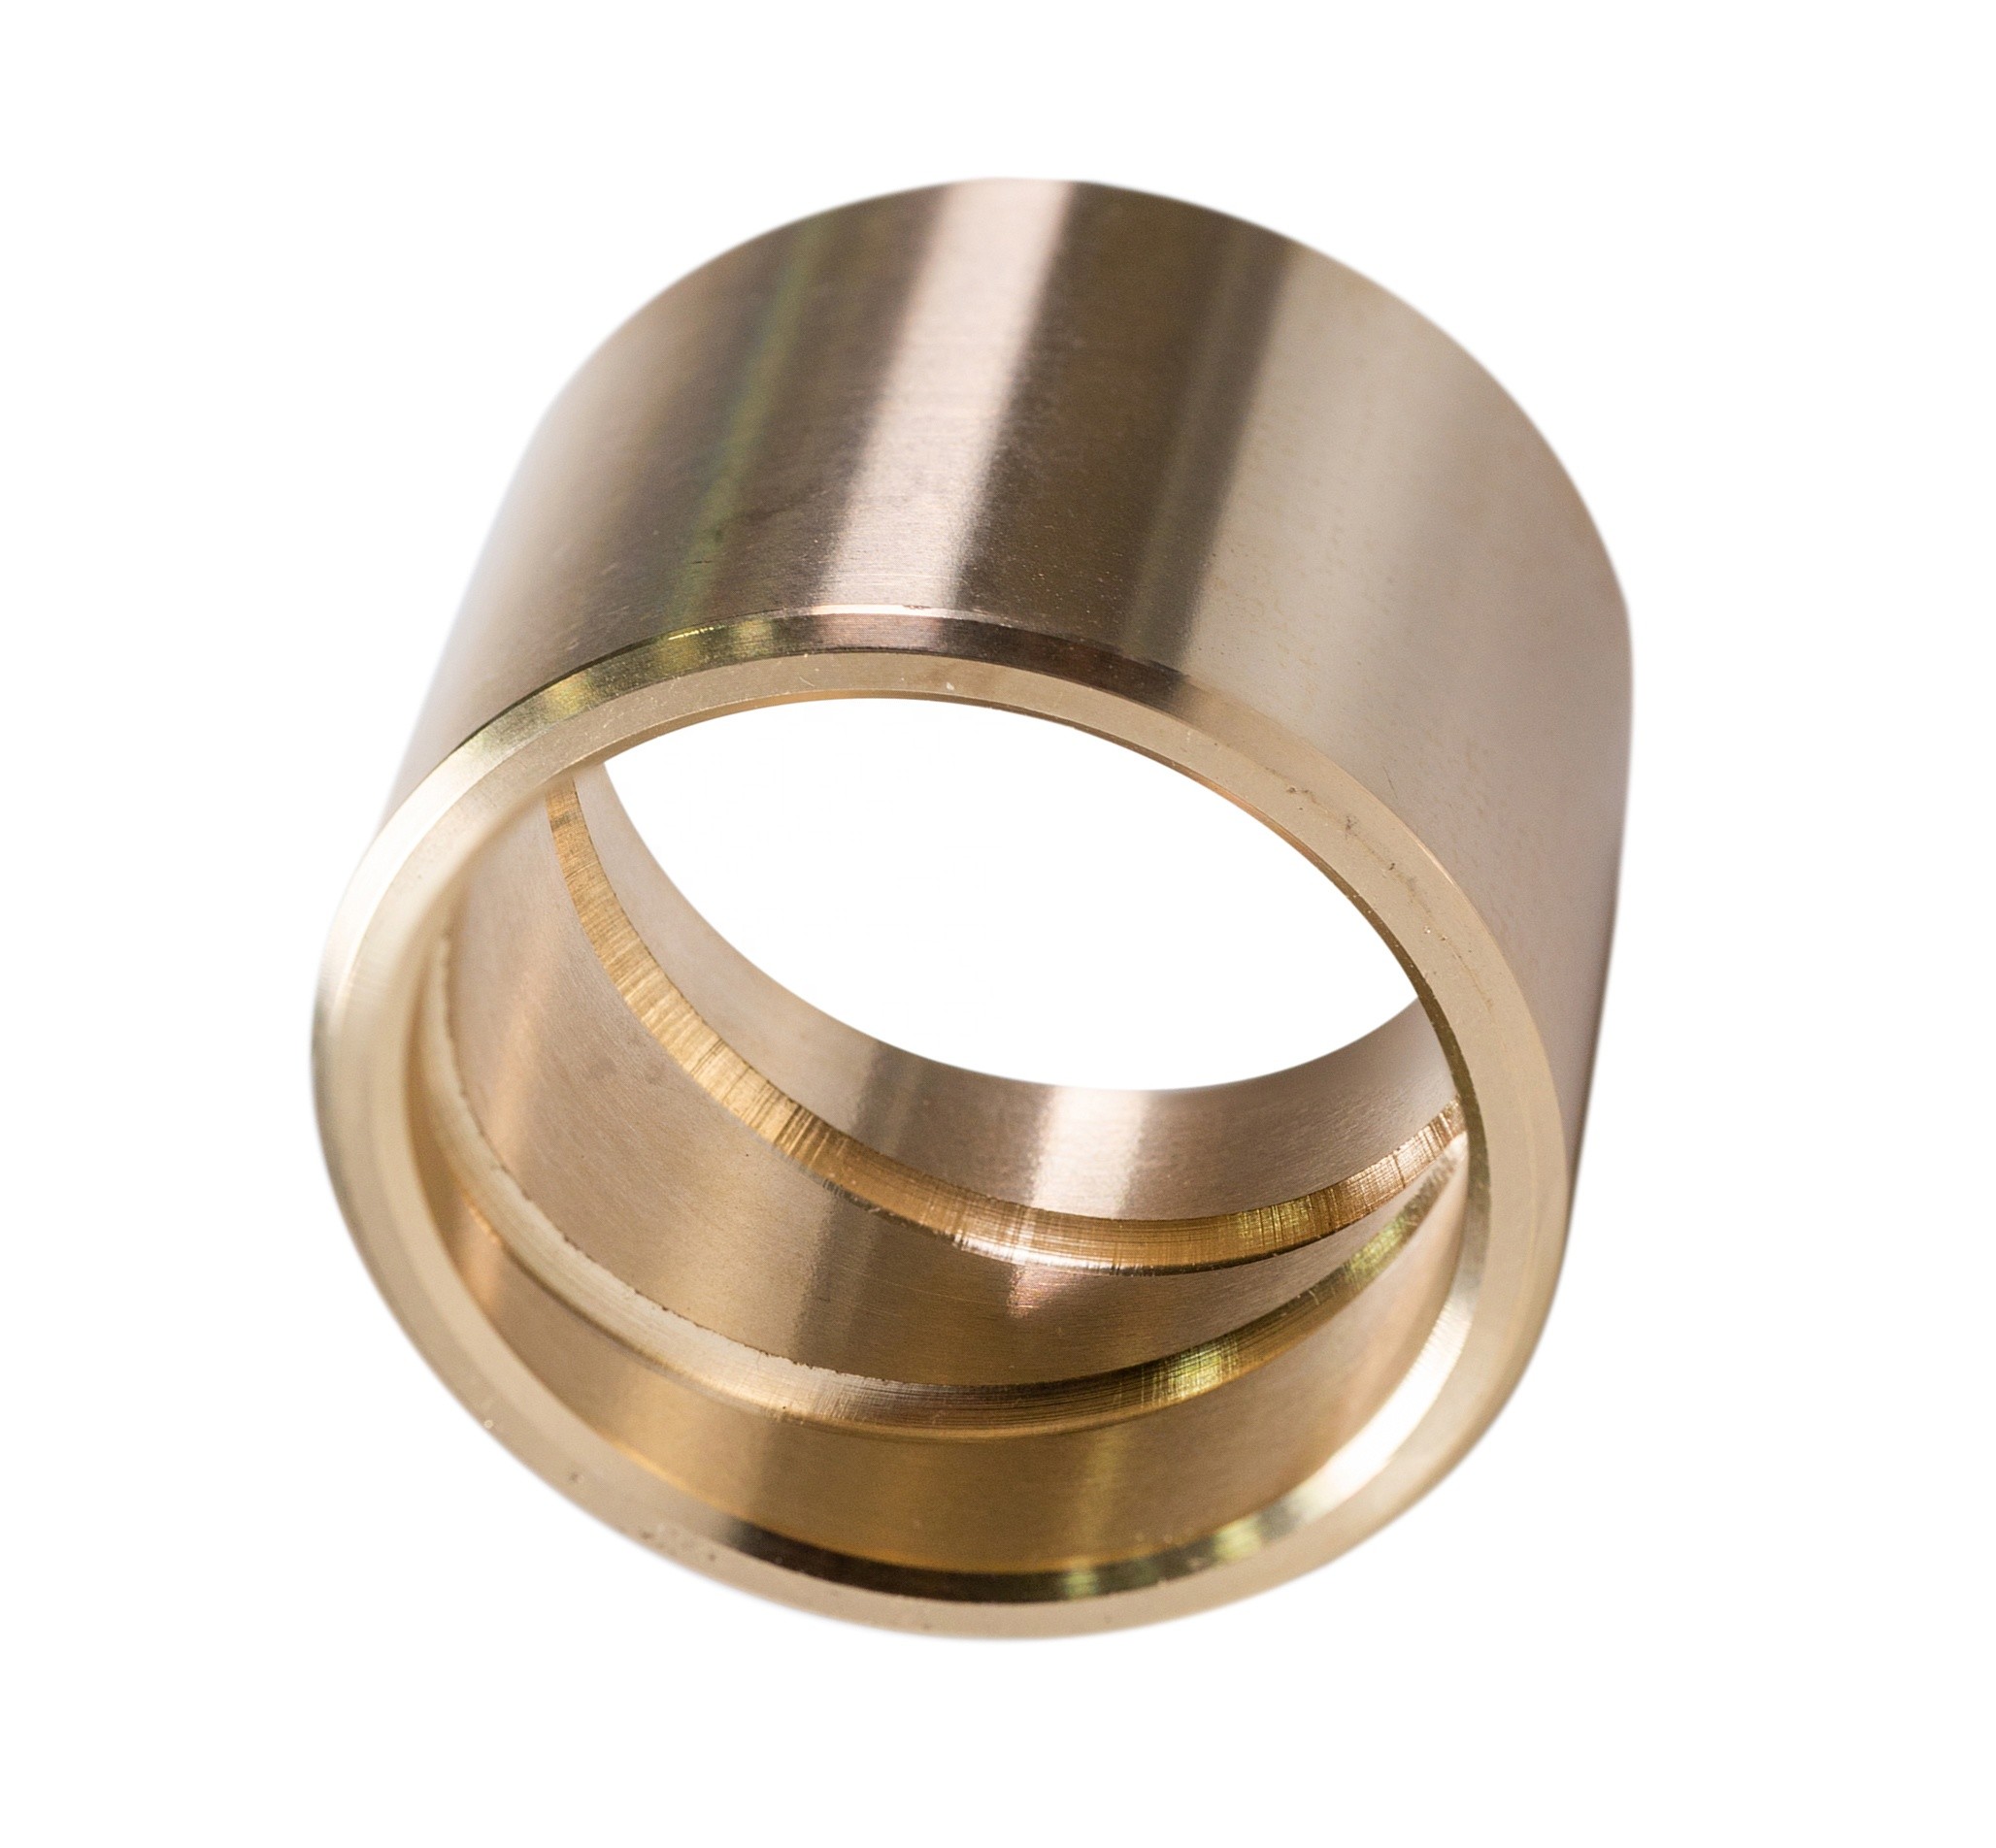 Quality Agricultural Machinery 60N/Mm² CuSn10 Cast Bronze Bushings for sale